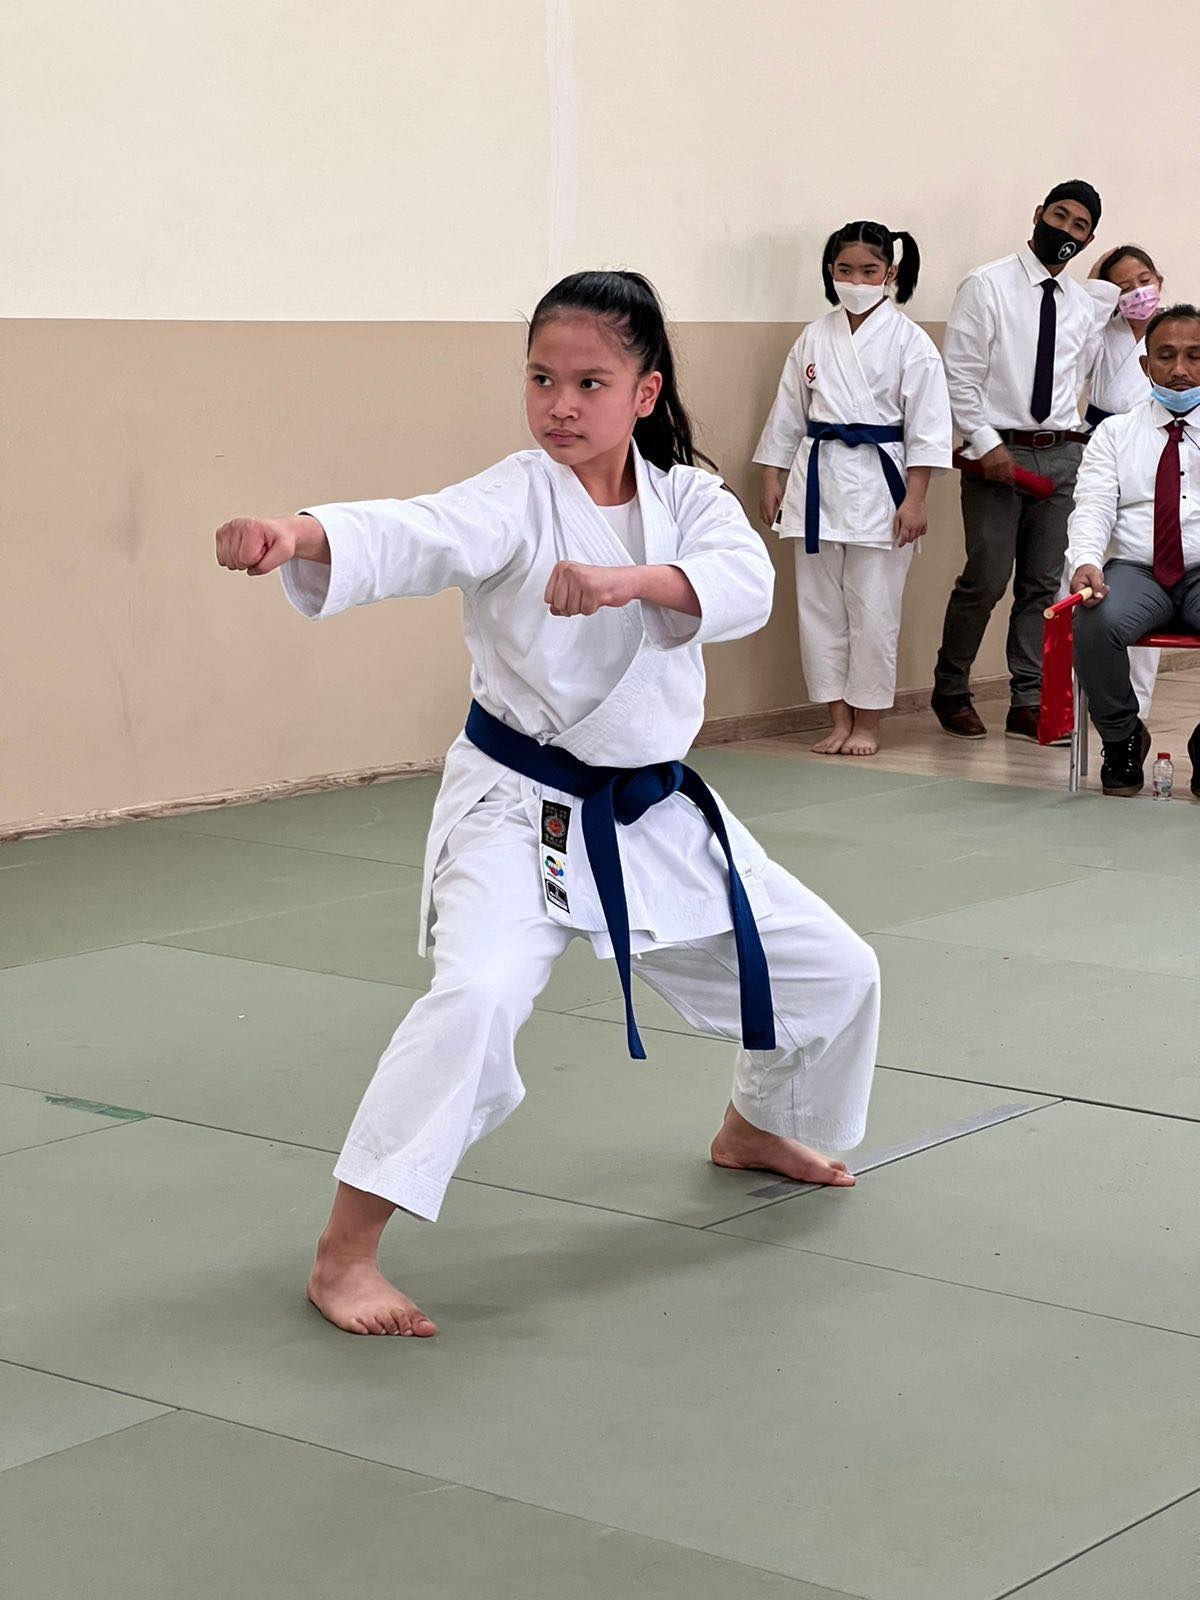 SKIF undefeated player who participated in 4 tournaments - Chantal Yuri in action - kata category